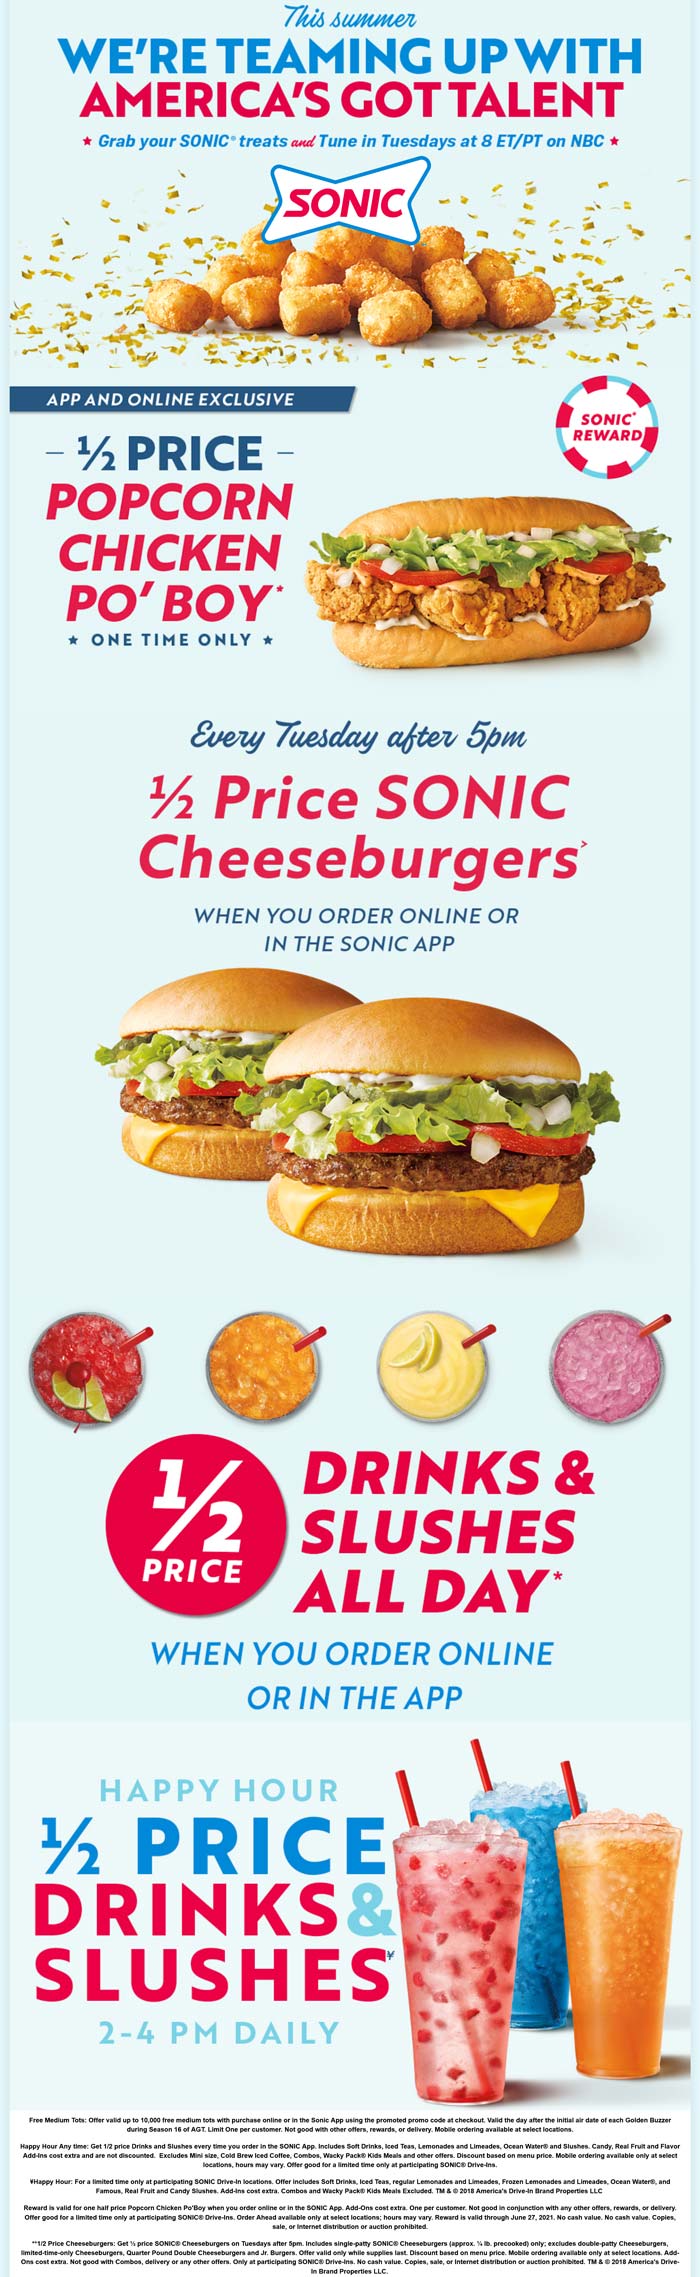 Sonic Drive-In restaurants Coupon  Free tater tots, 50% off chicken po boy sandwich or cheeseburgers & more online at Sonic Drive-In #sonicdrivein 